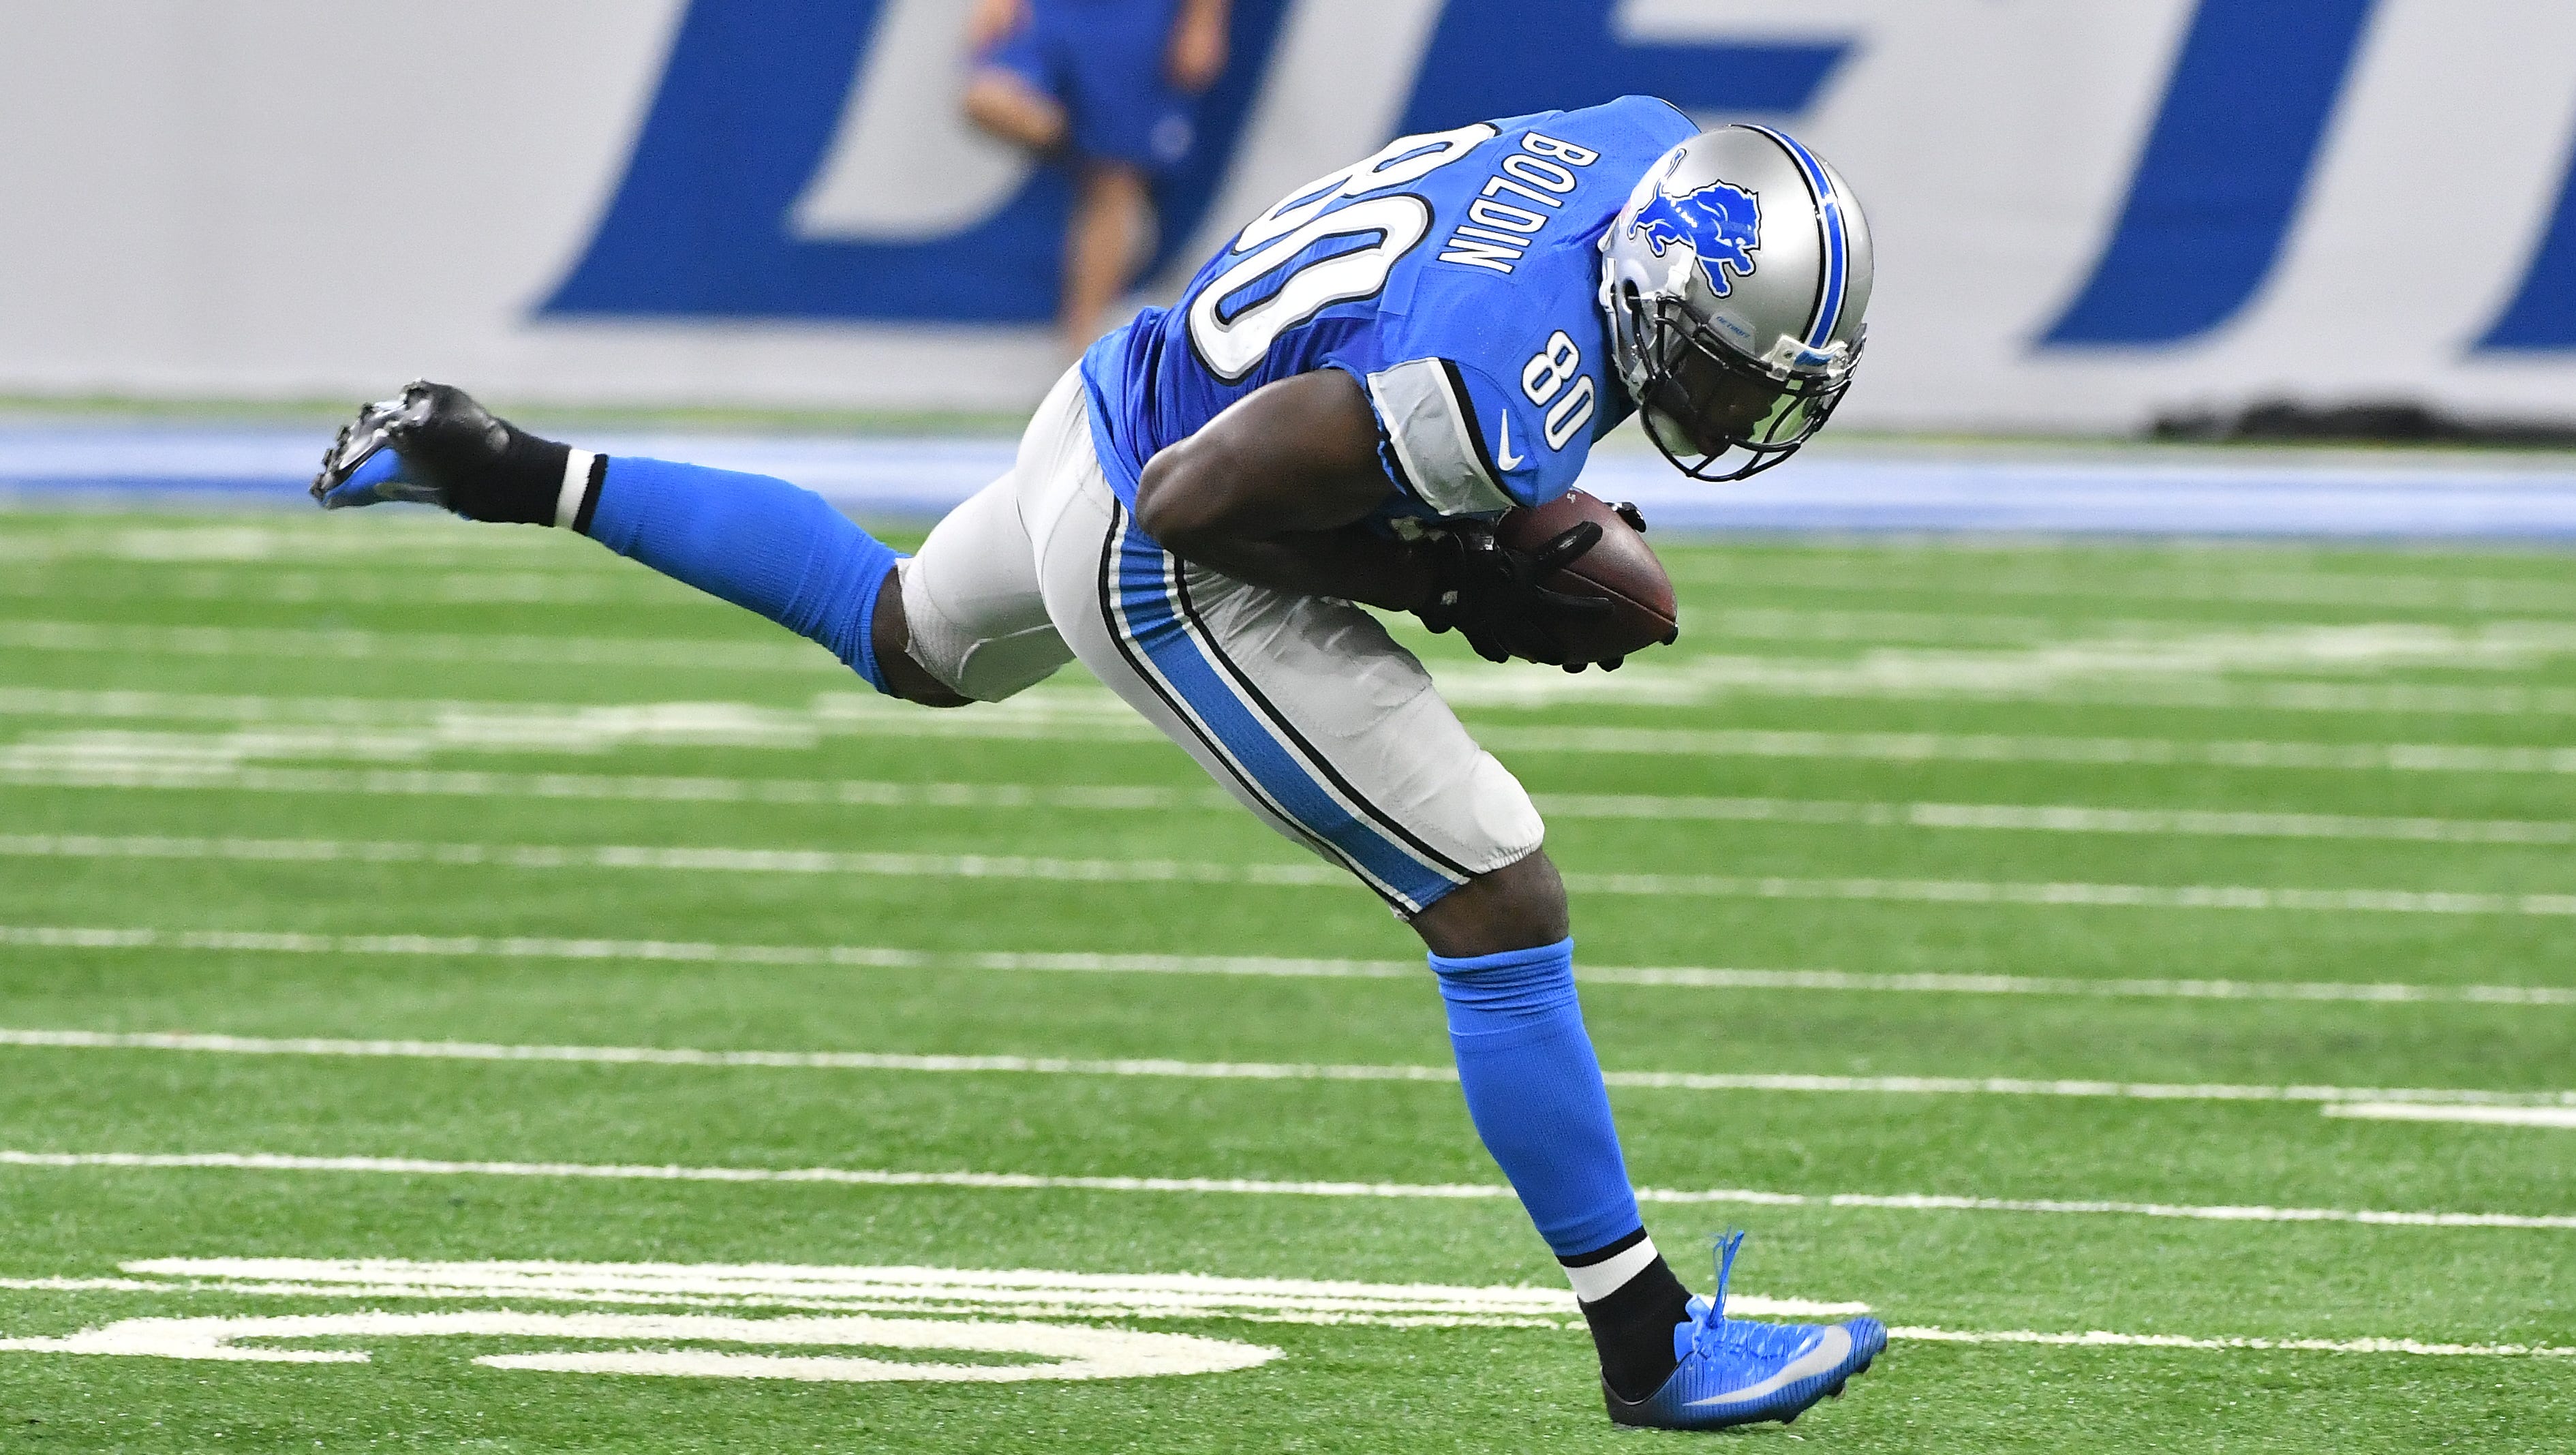 Lions wide receiver Anquan Boldin is able to keep running up field after pulling in a reception on the Lions' winning drive in the fourth quarter.